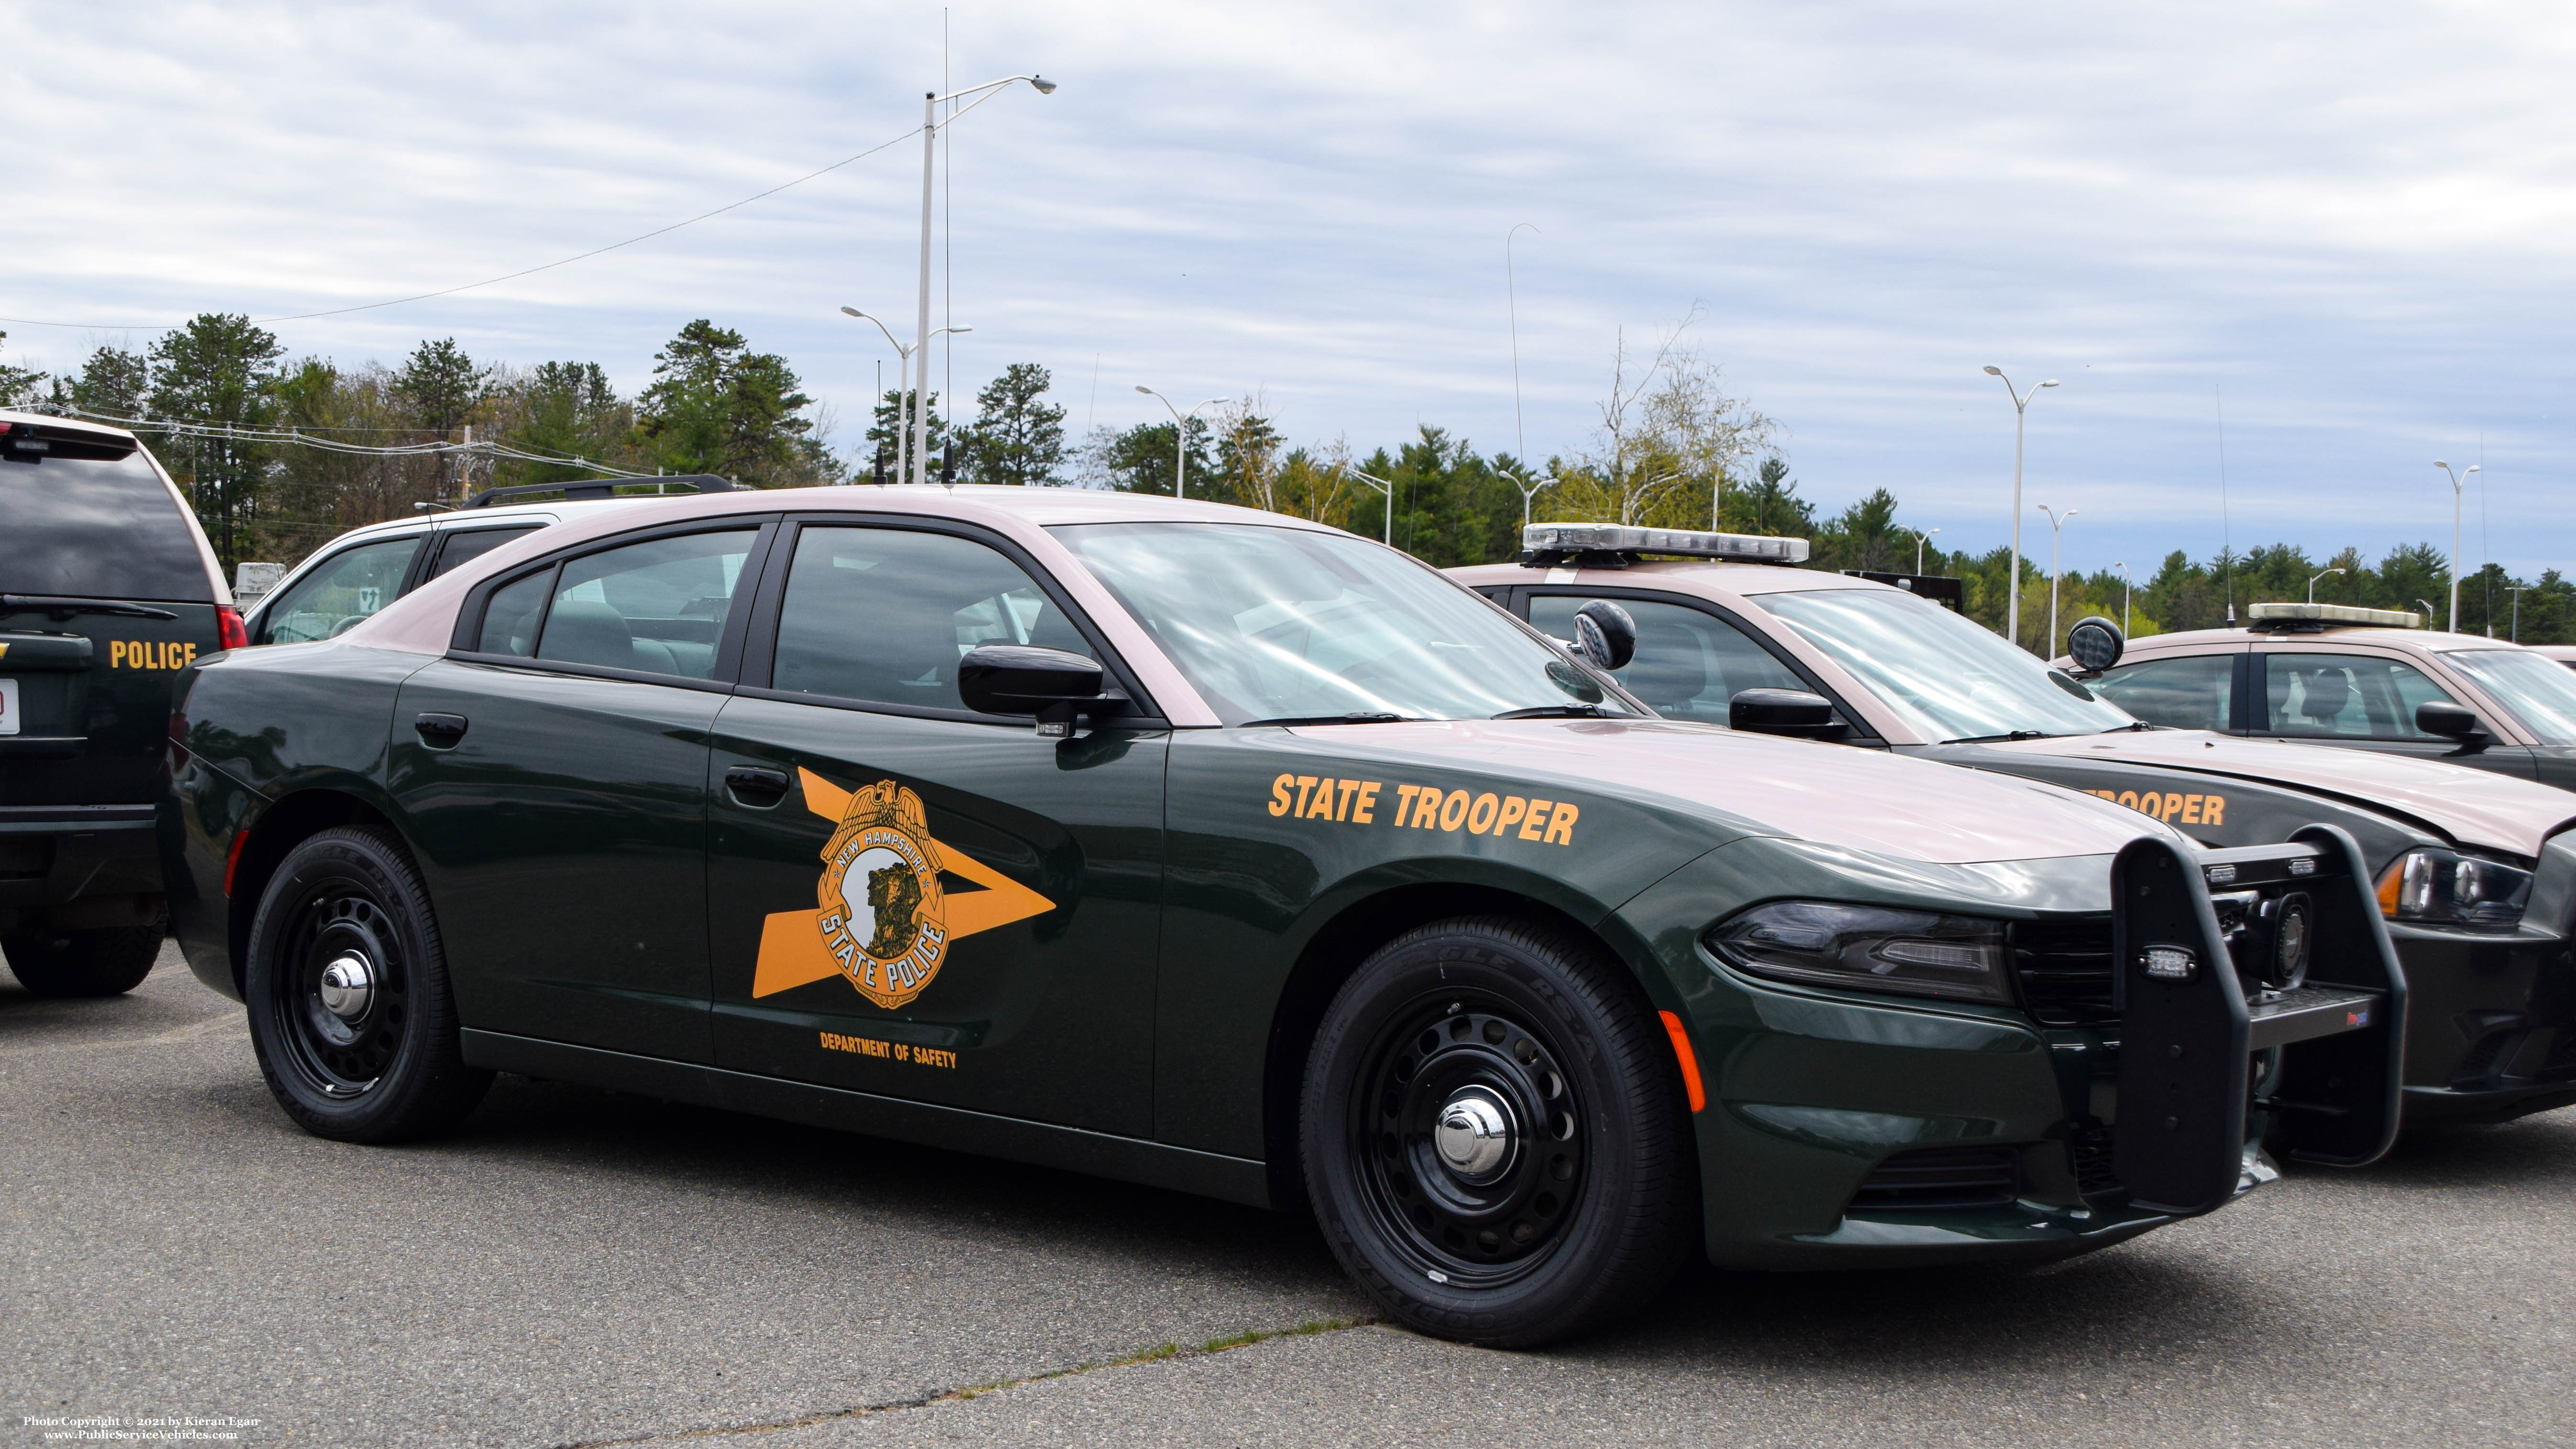 A photo  of New Hampshire State Police
            Cruiser 516, a 2020 Dodge Charger             taken by Kieran Egan